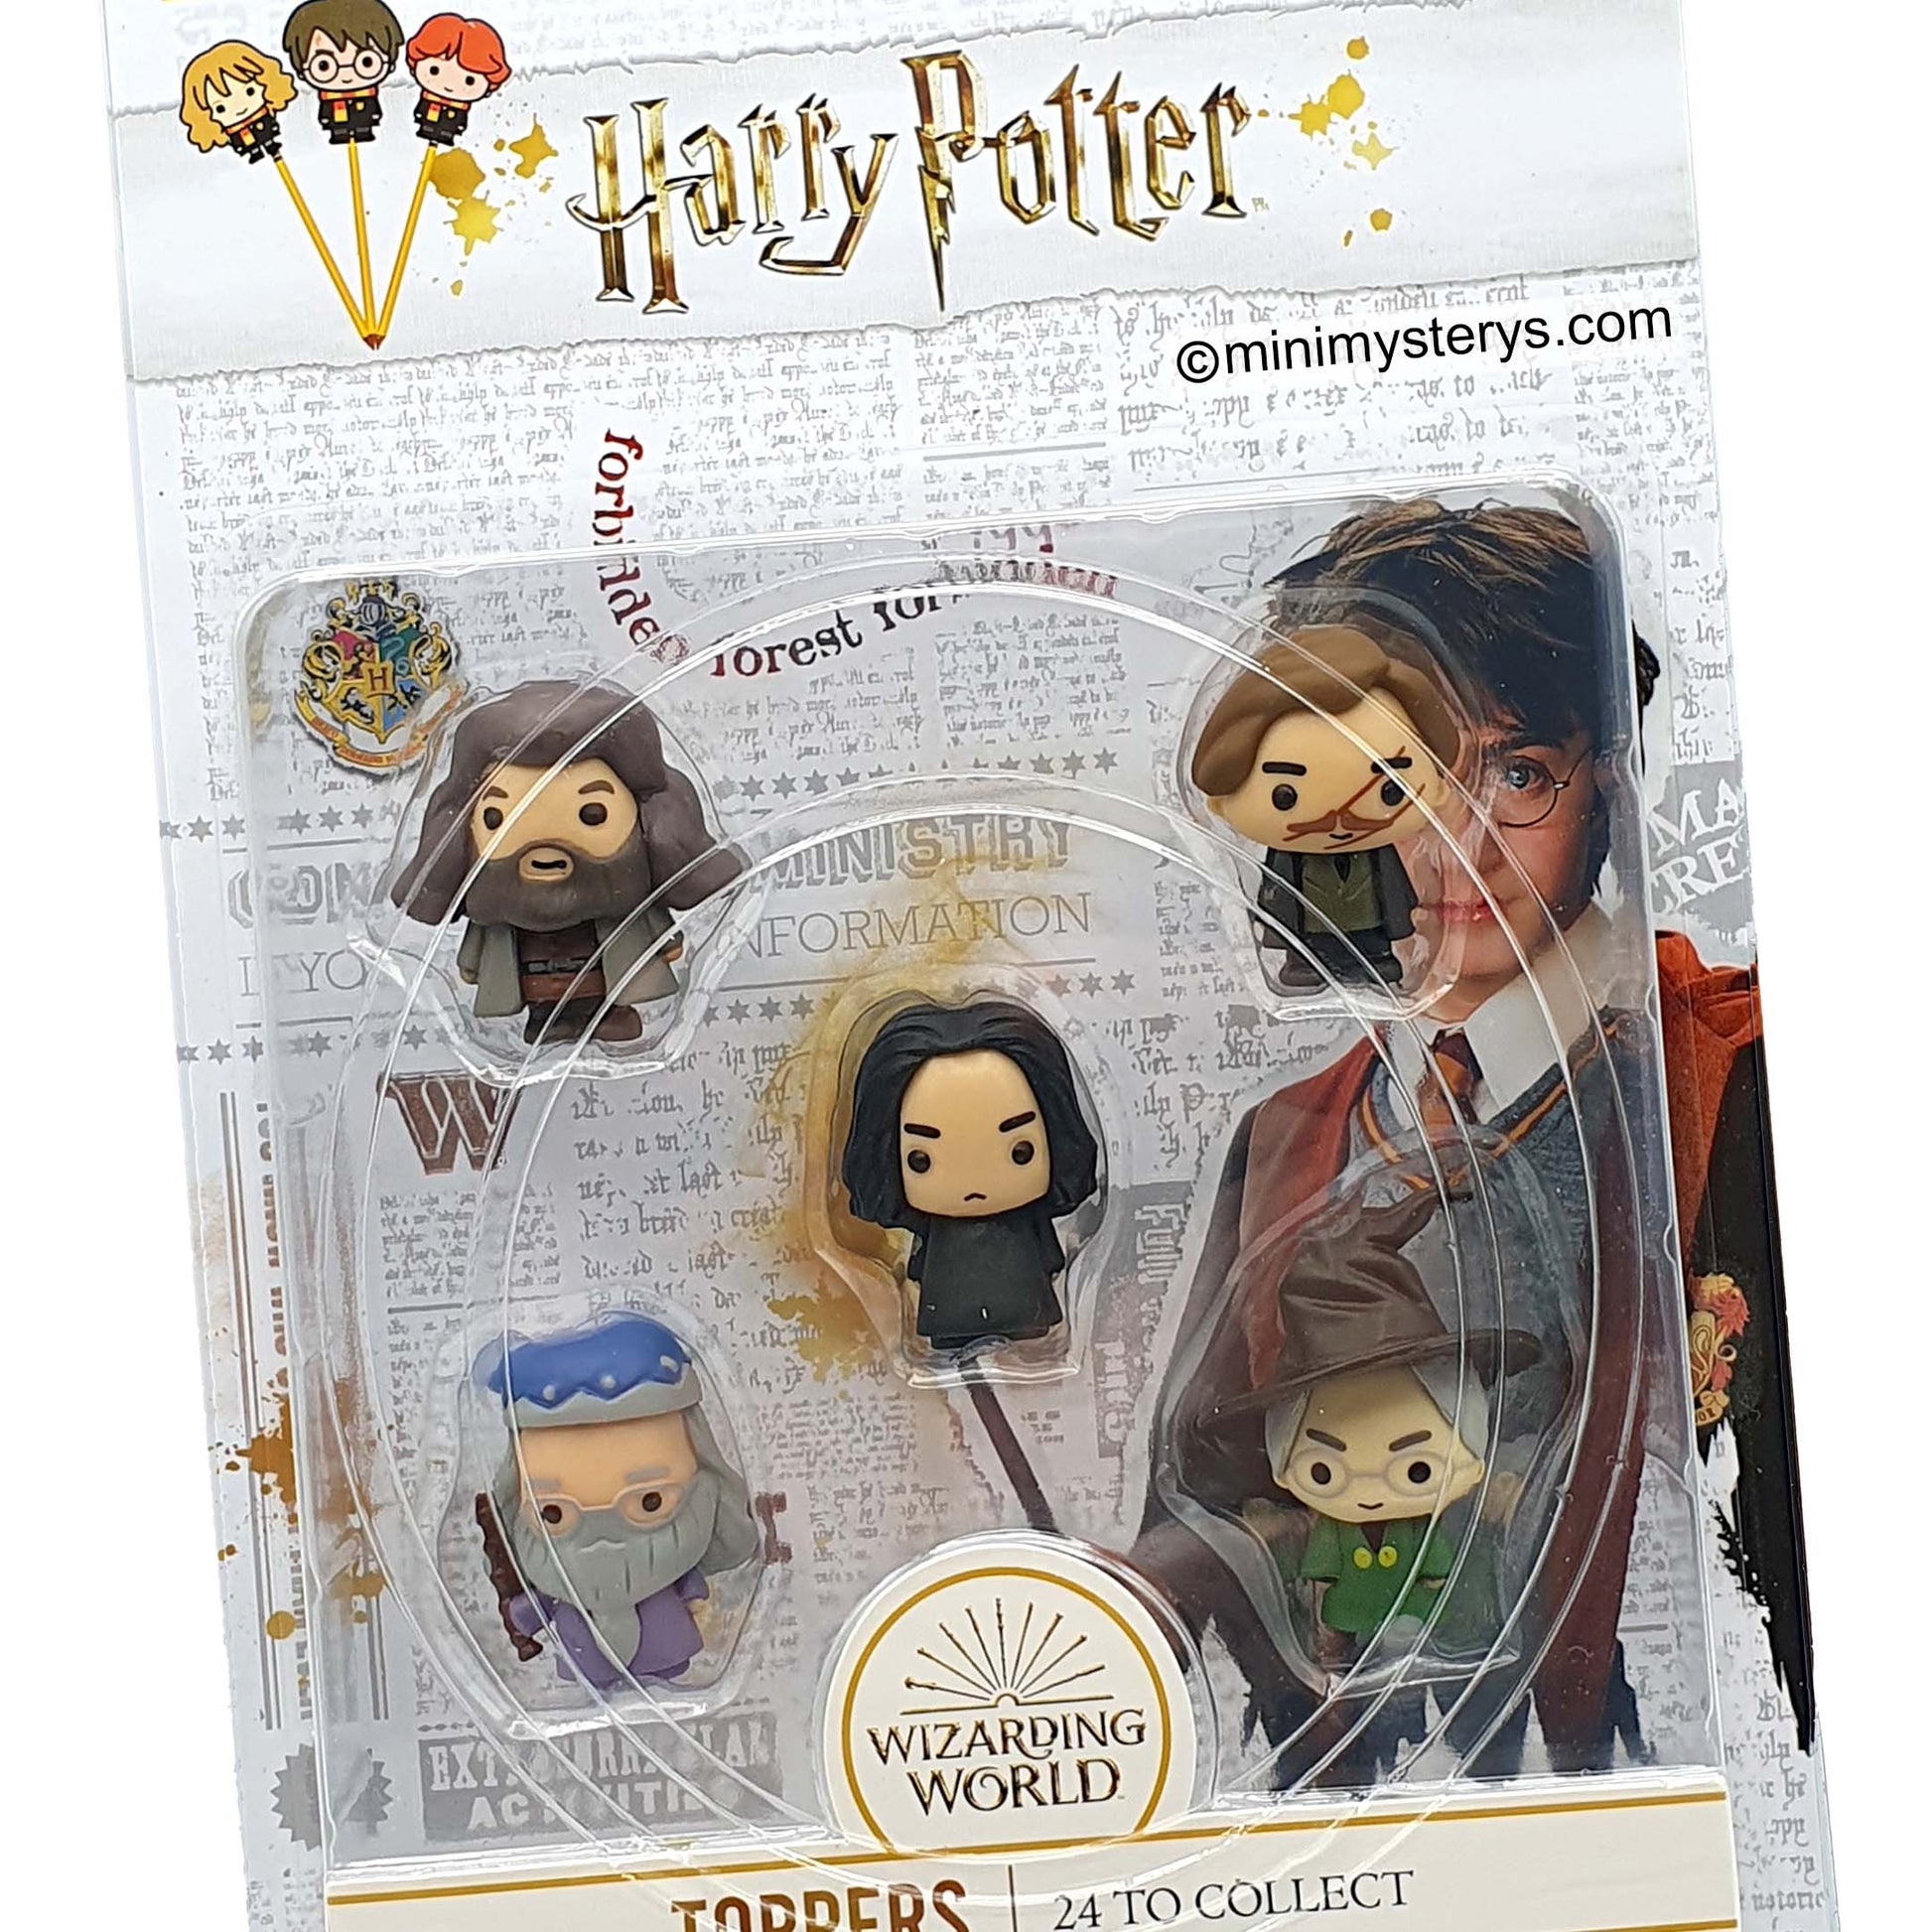 Harry Potter Pencil Toppers, Gifts, Toys, Collectibles - Set of 5 Harry Potter Figures for Writing, Party Decor - Death Eater, Voldemort, Lucius